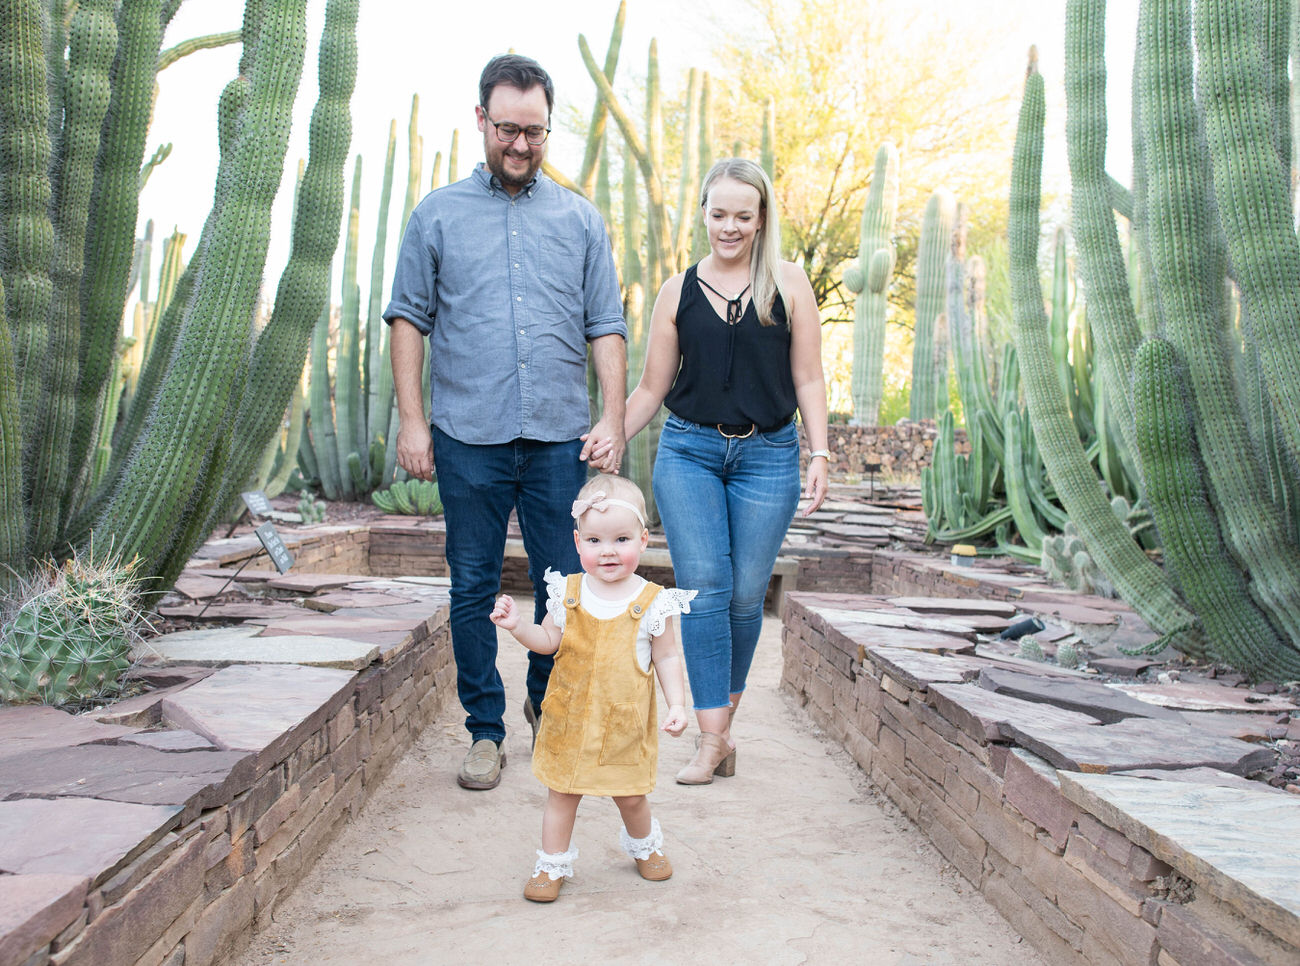 A family of three walking hand-in-hand through the Desert Botanical Garden in Arizona, with a toddler in a yellow dress leading the way amid a cactus-lined path.